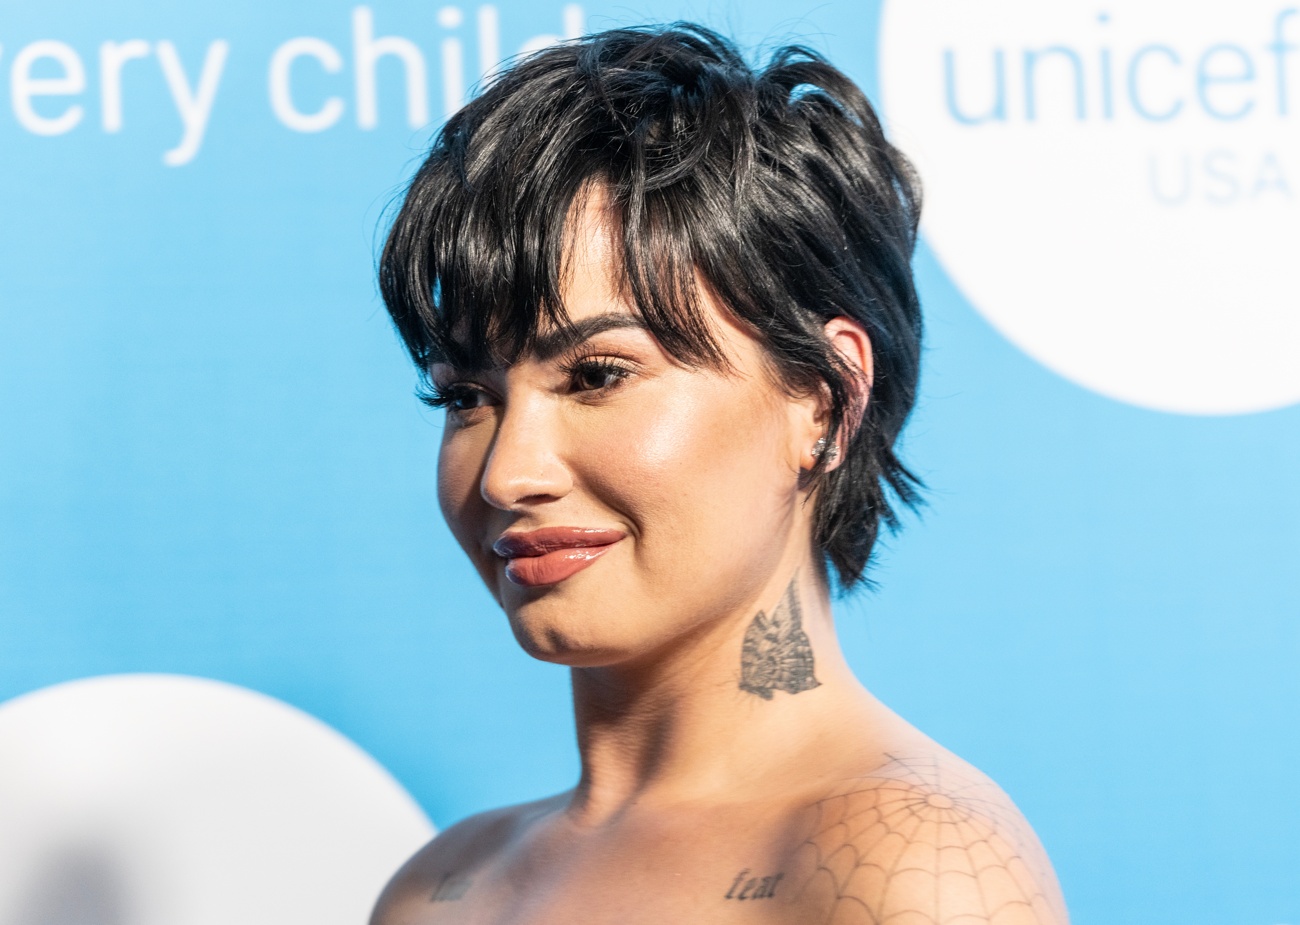 Demi Lovato celebrates start of Pride Month with message of hope: ‘You are all extraordinary’